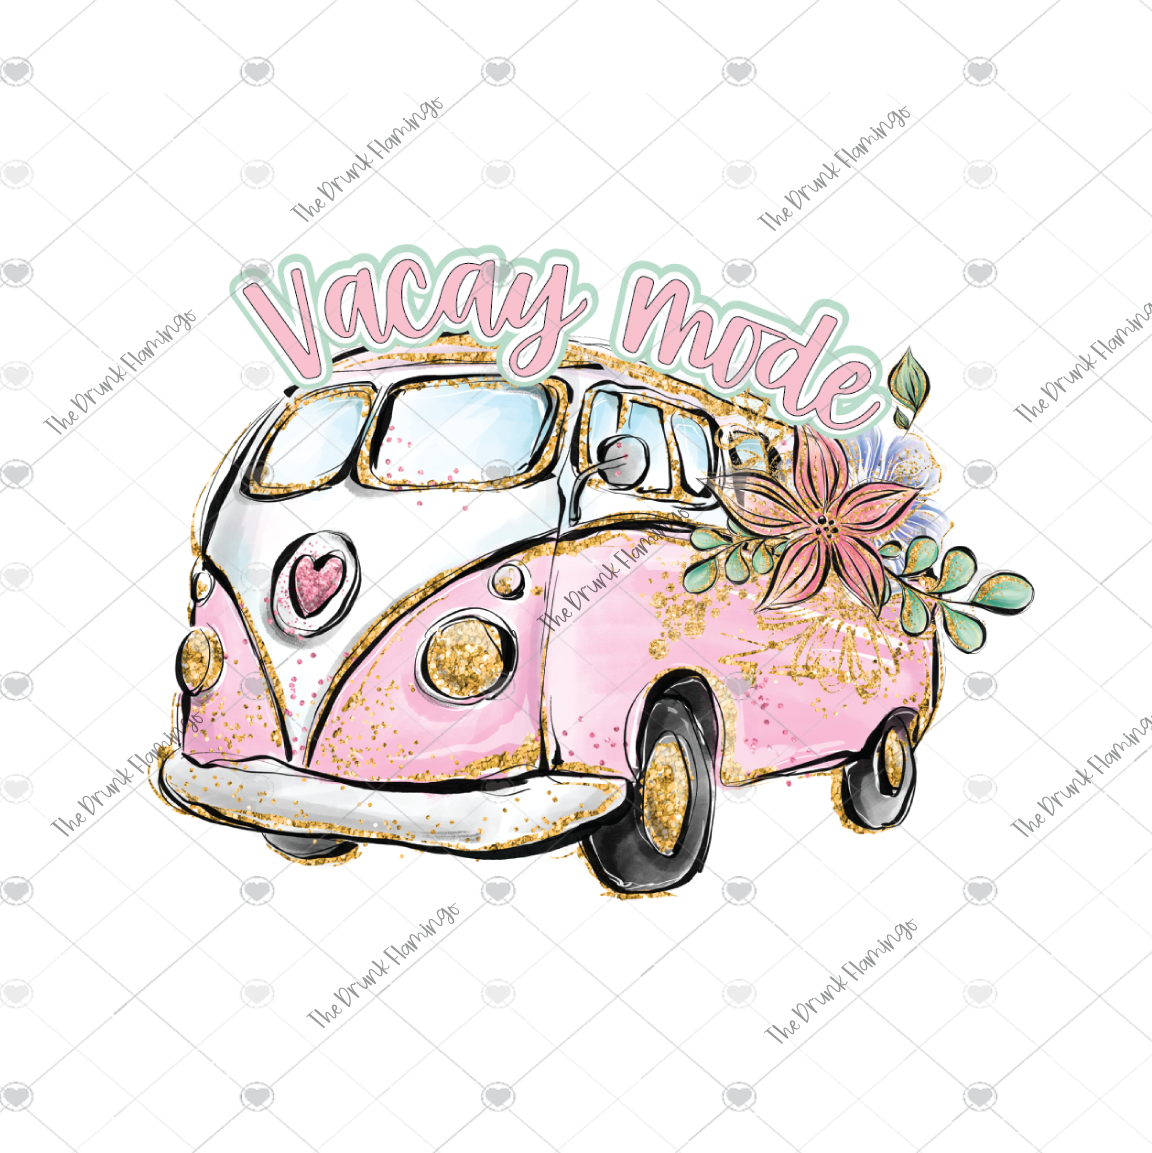 39-Vacay Mode RVi WHITE BACKED decal